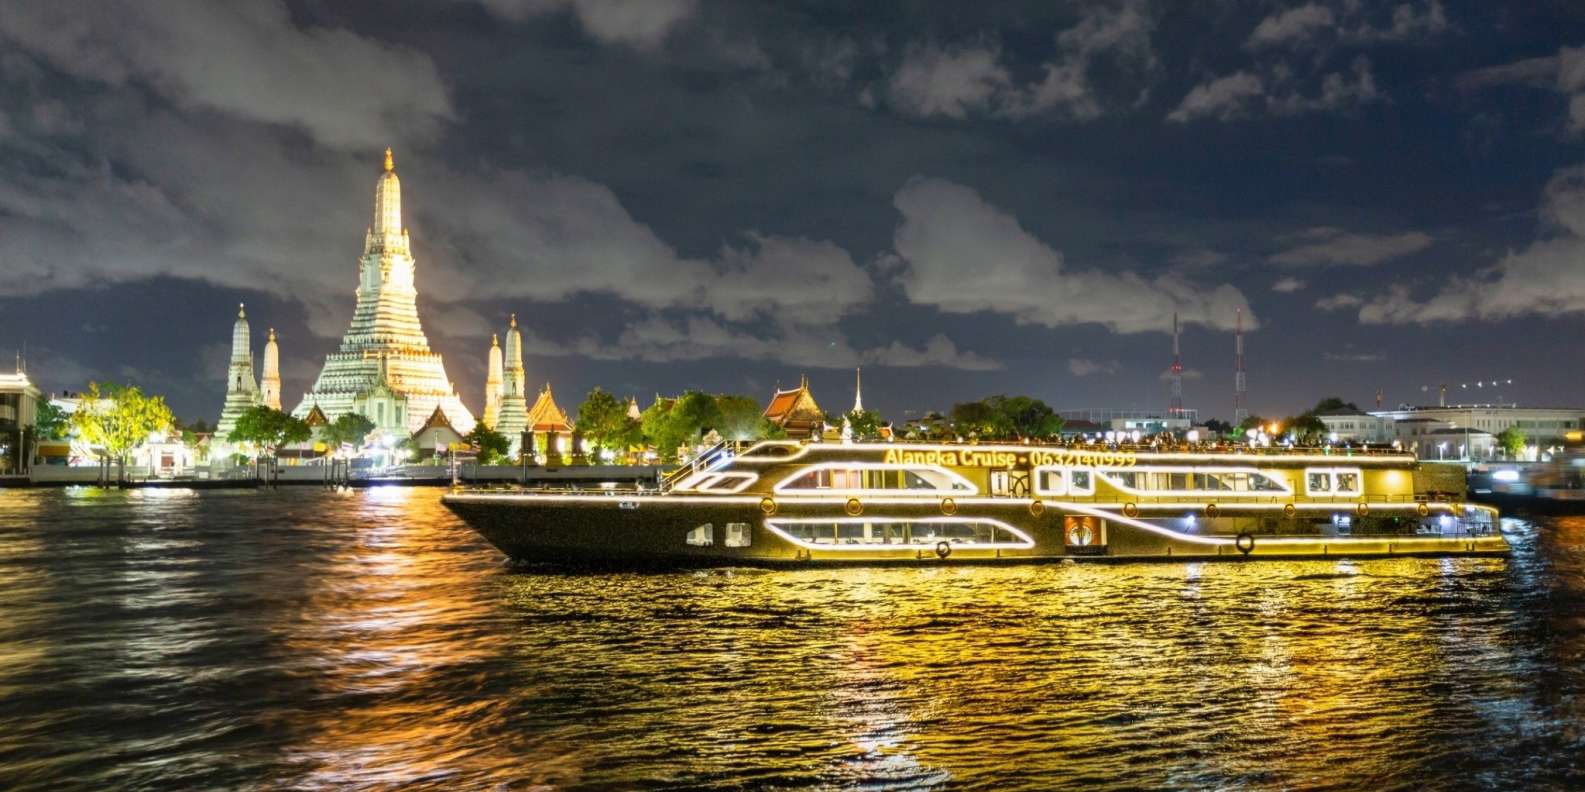 IconSiam Bangkok: Best Things to Do, Must-Eats, Getting There, IconSiam  E-Tourist Card, and More